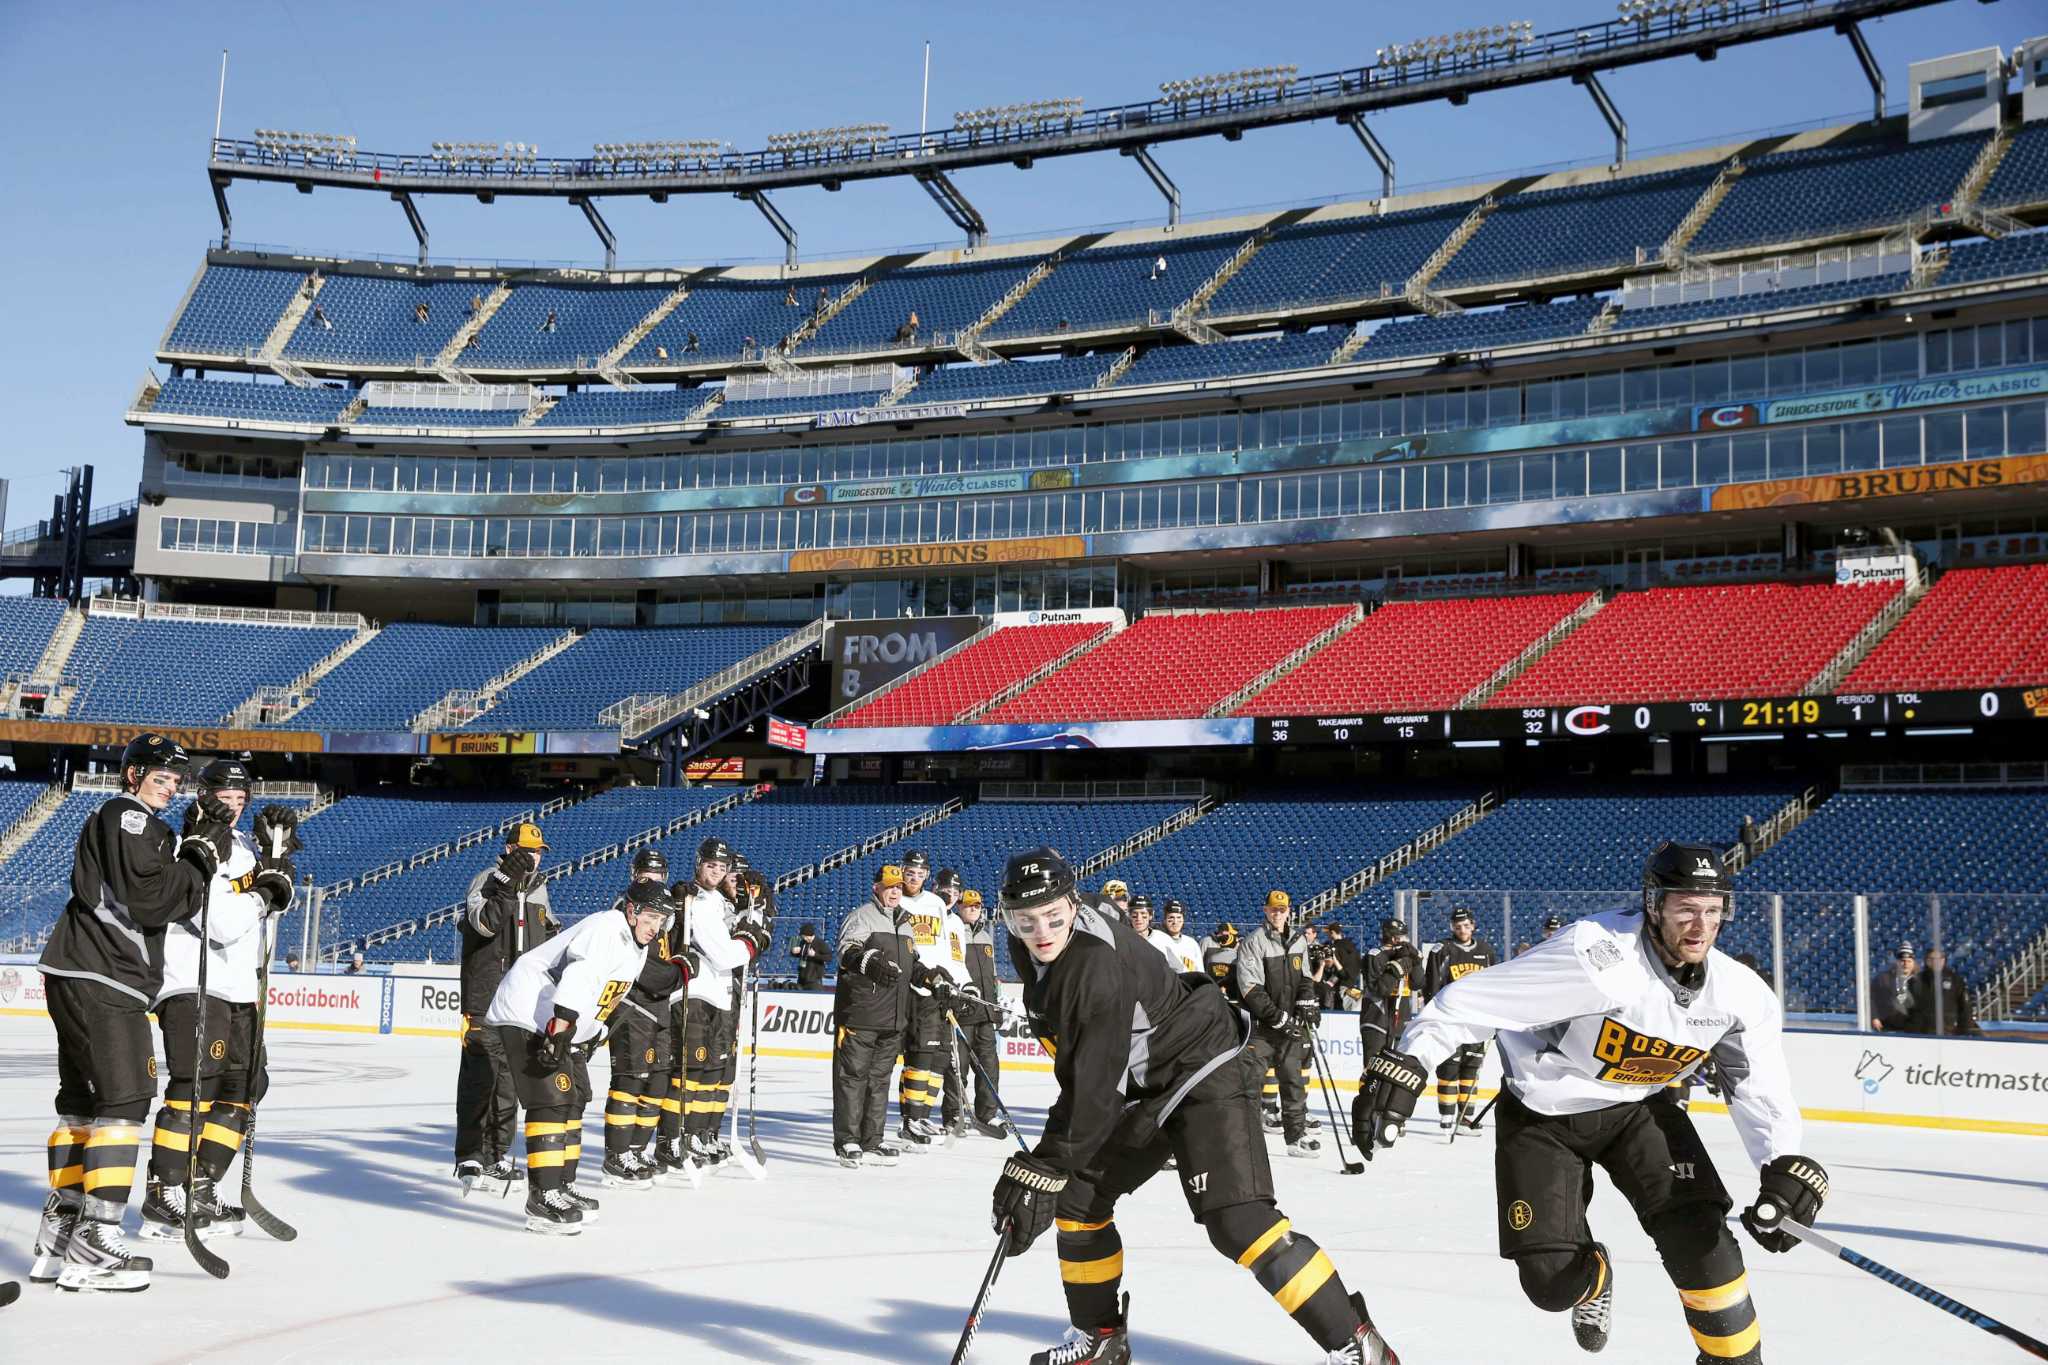 2023 NHL Winter Classic - Practices & Family Skate